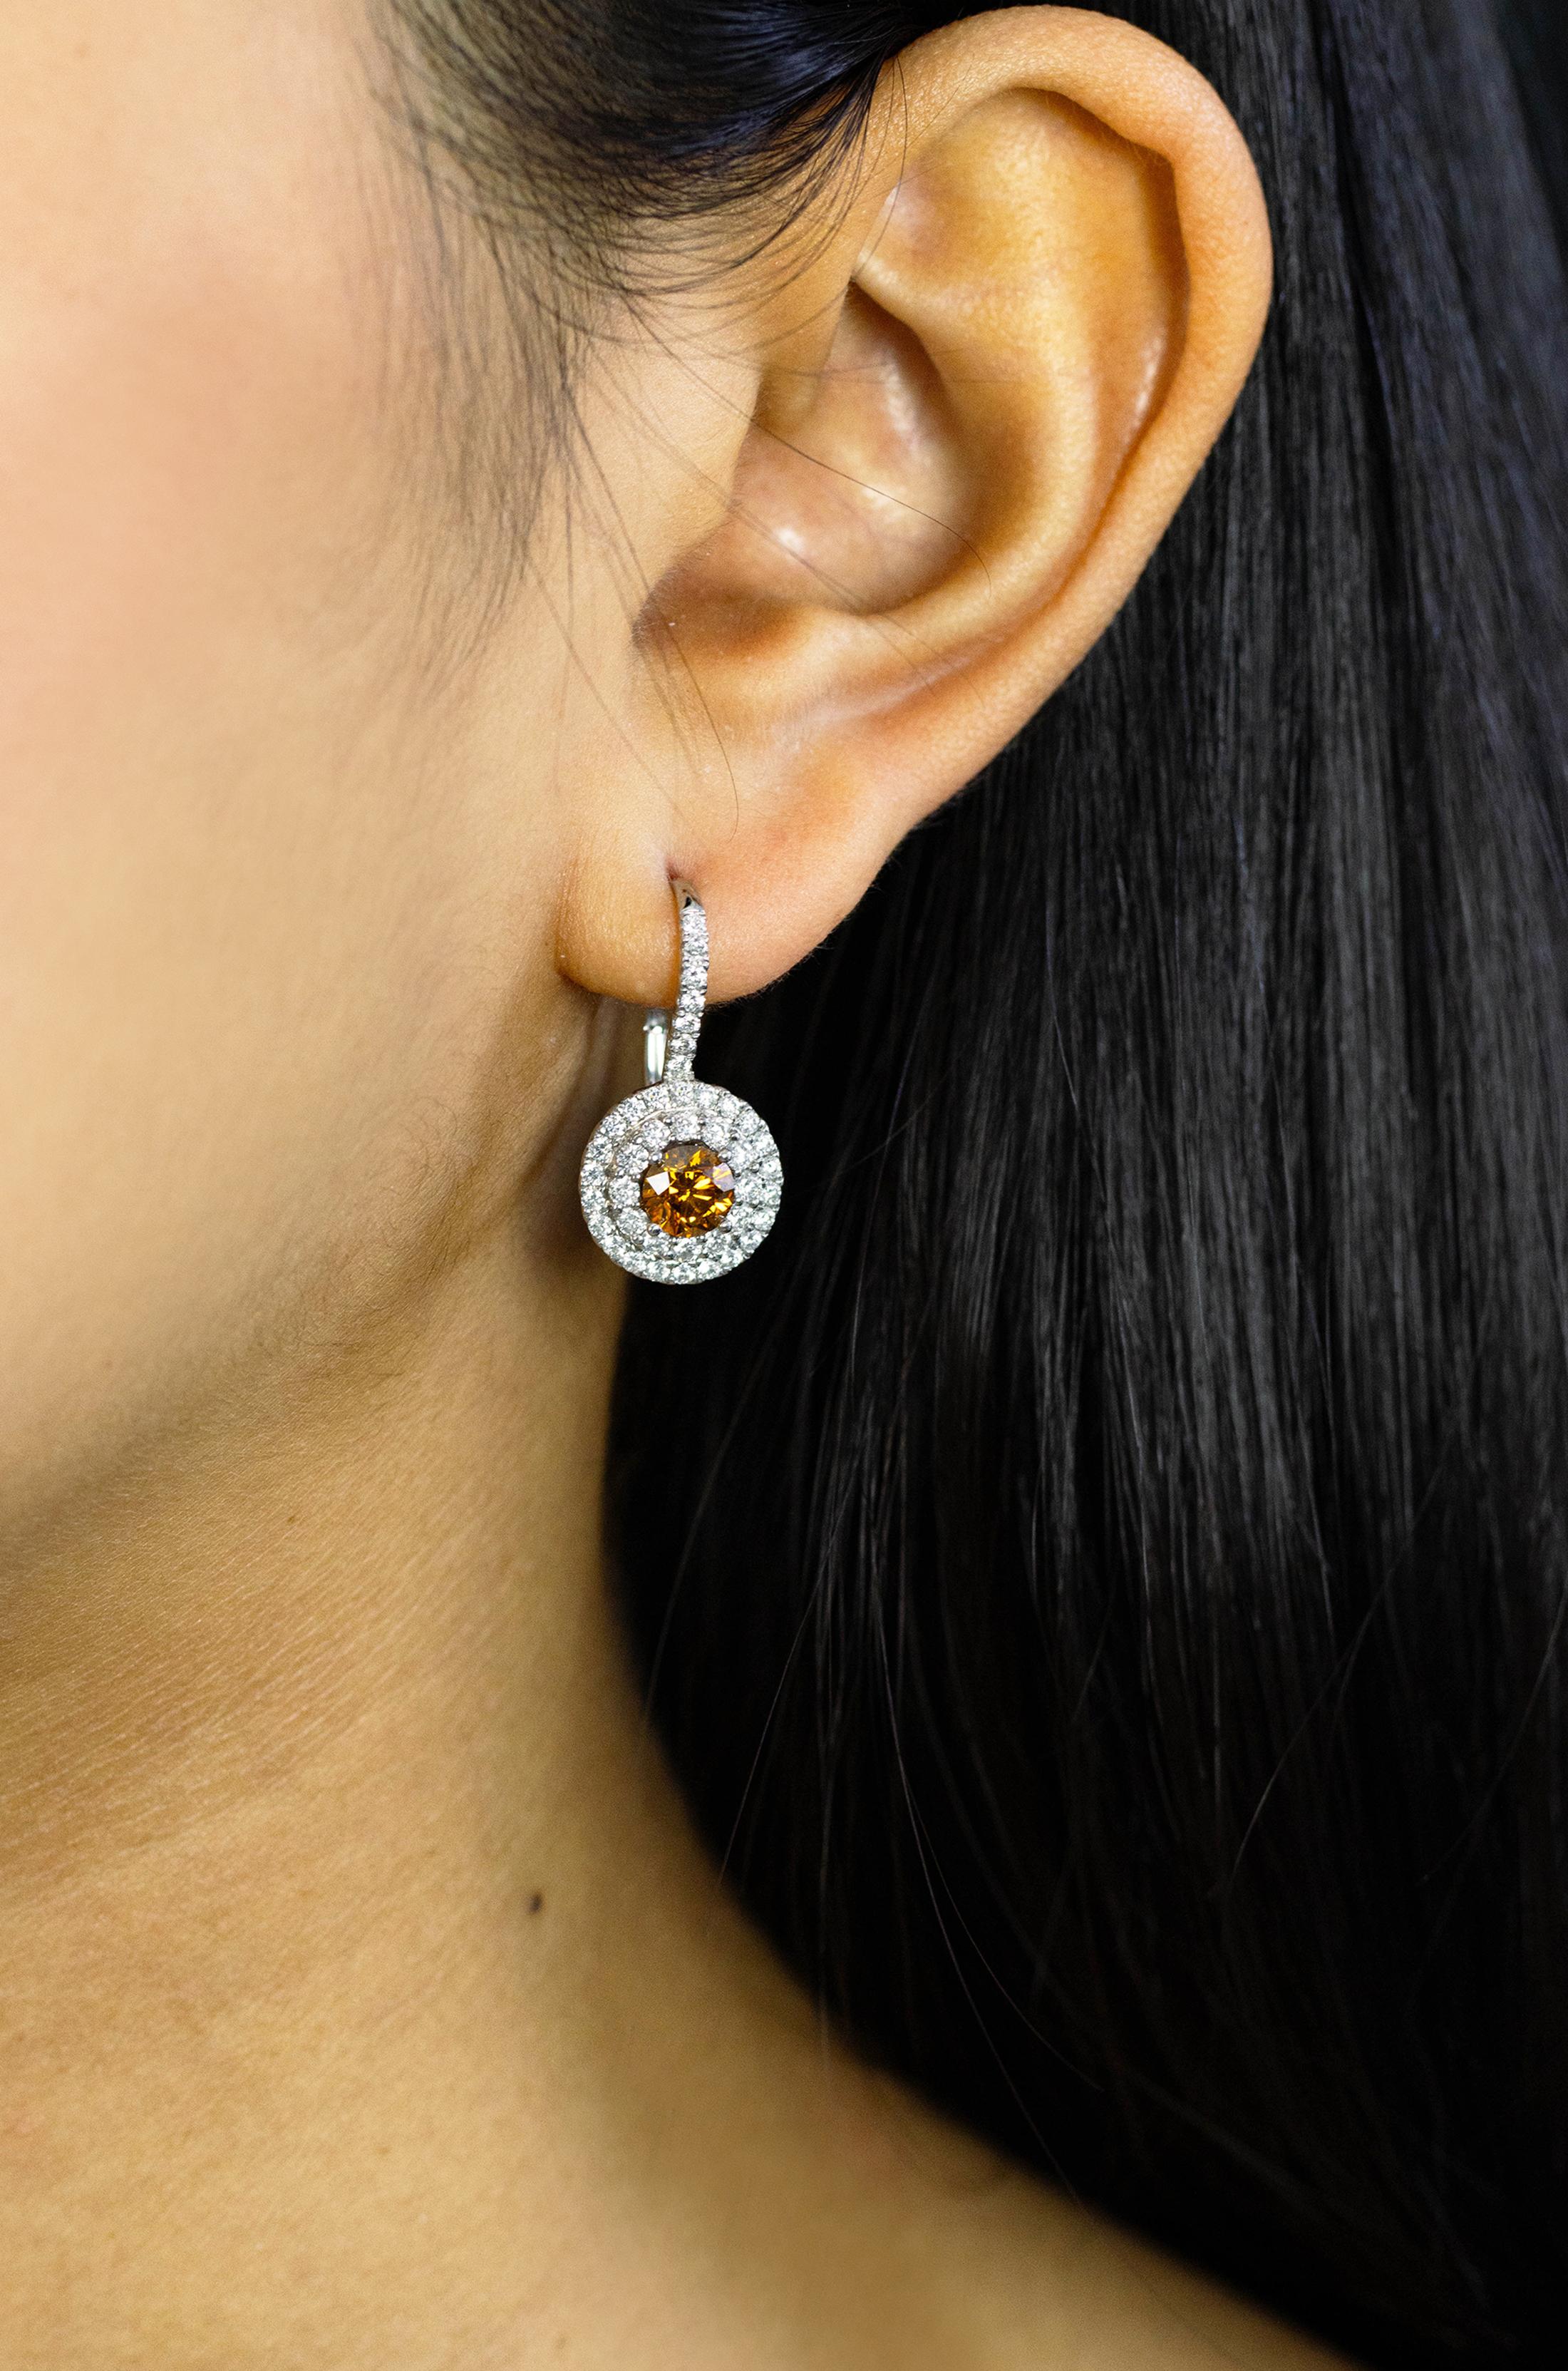 This beautiful pair of earrings feature 2 GIA Certified center stones weighing 0.65 and 0.67 carats respectively. GIA certified the stones as having a Fancy Deep Yellow Orange color. Both stones are accented by 2 rows of round brilliant diamonds